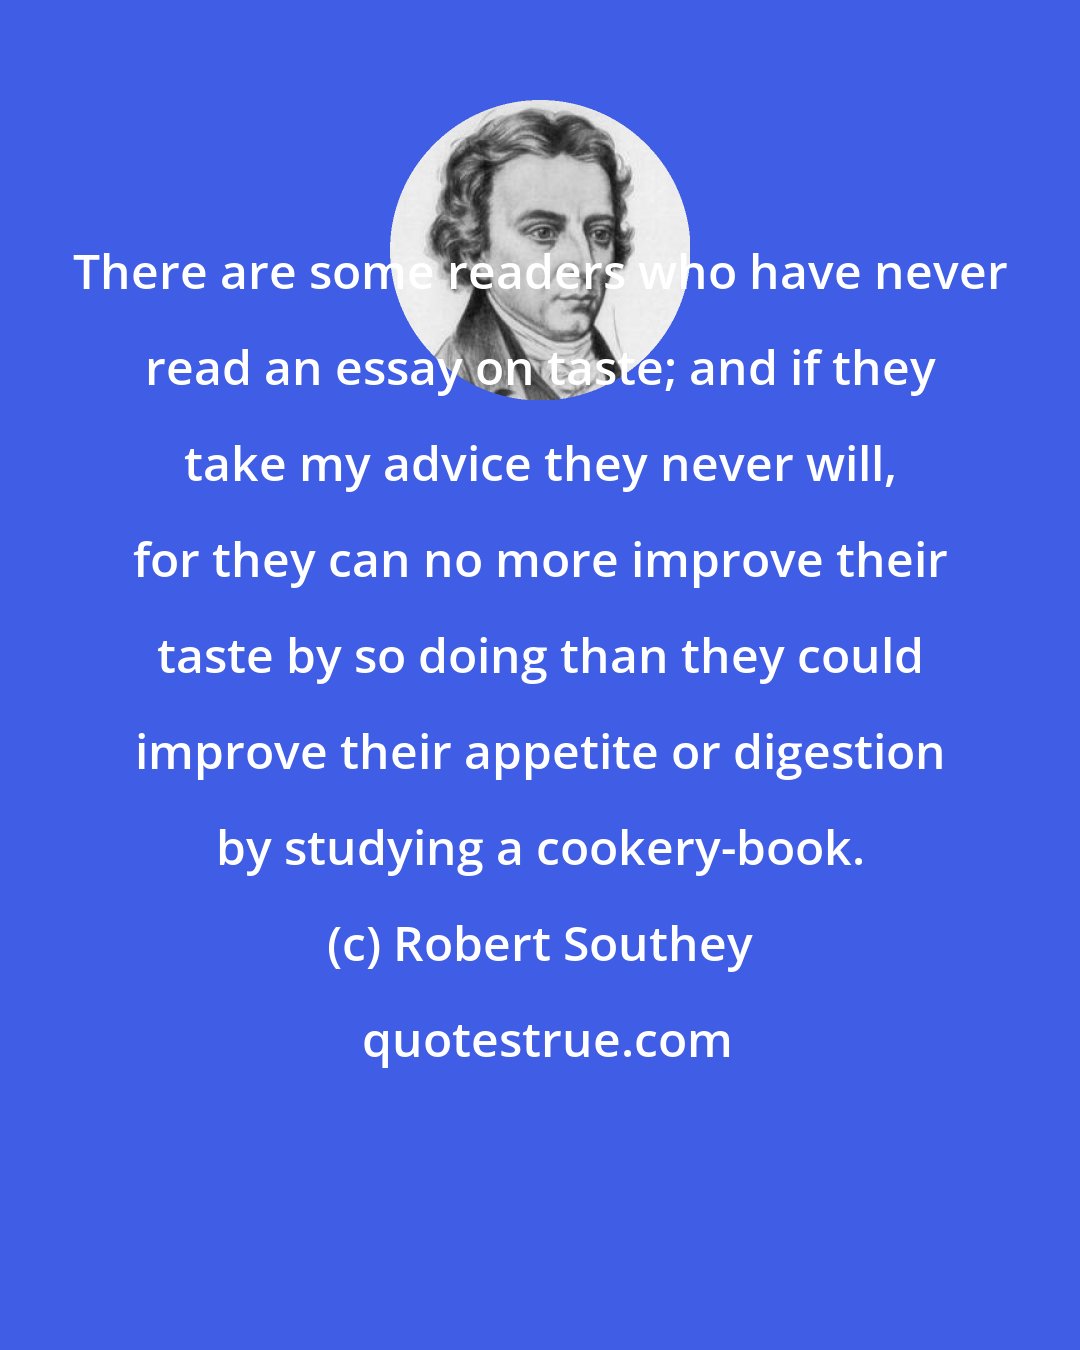 Robert Southey: There are some readers who have never read an essay on taste; and if they take my advice they never will, for they can no more improve their taste by so doing than they could improve their appetite or digestion by studying a cookery-book.